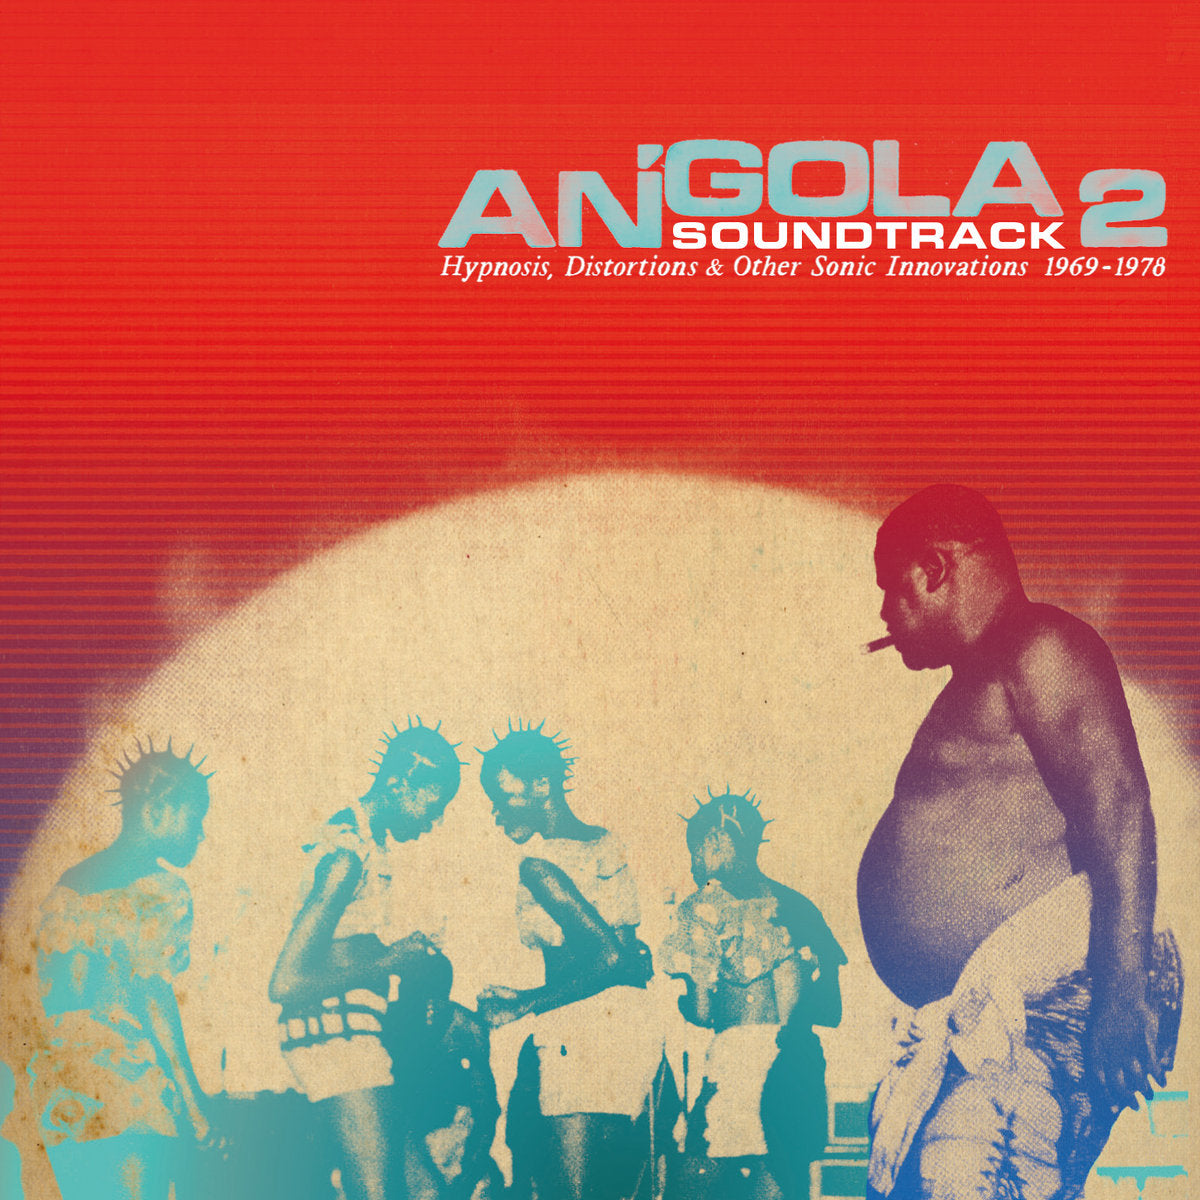 |v/a| "Angola Soundtrack 2: Hypnosis, Distortions & Other Sonic Innovations 1969-1978" 2LP